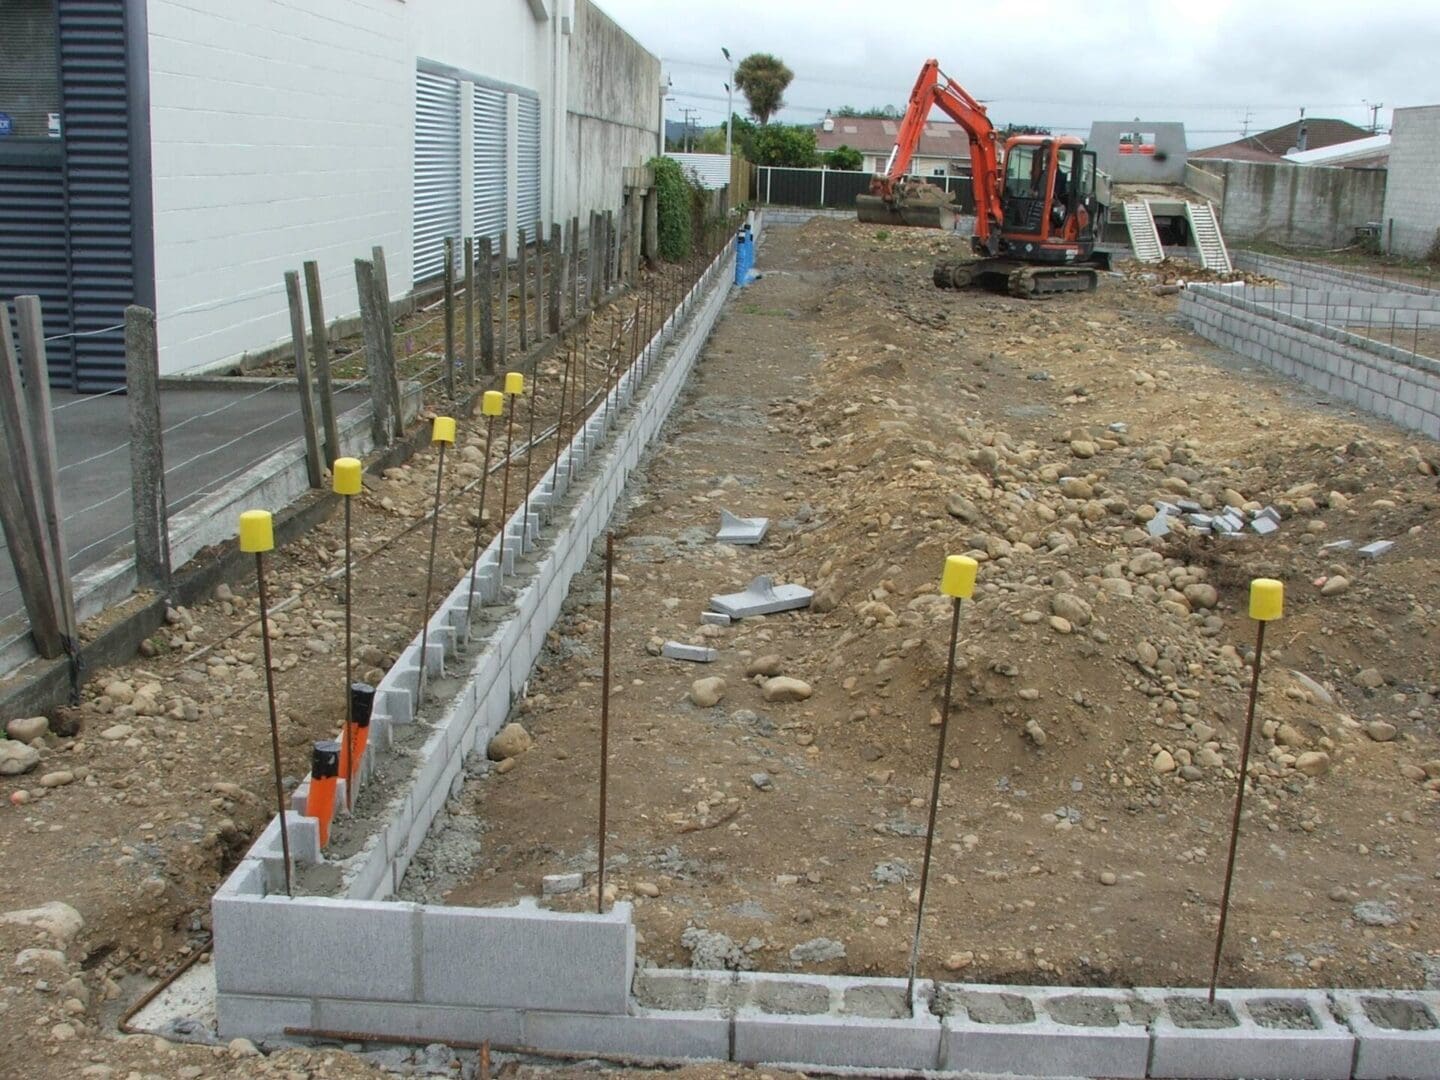 A construction site with a red tractor and yellow poles.